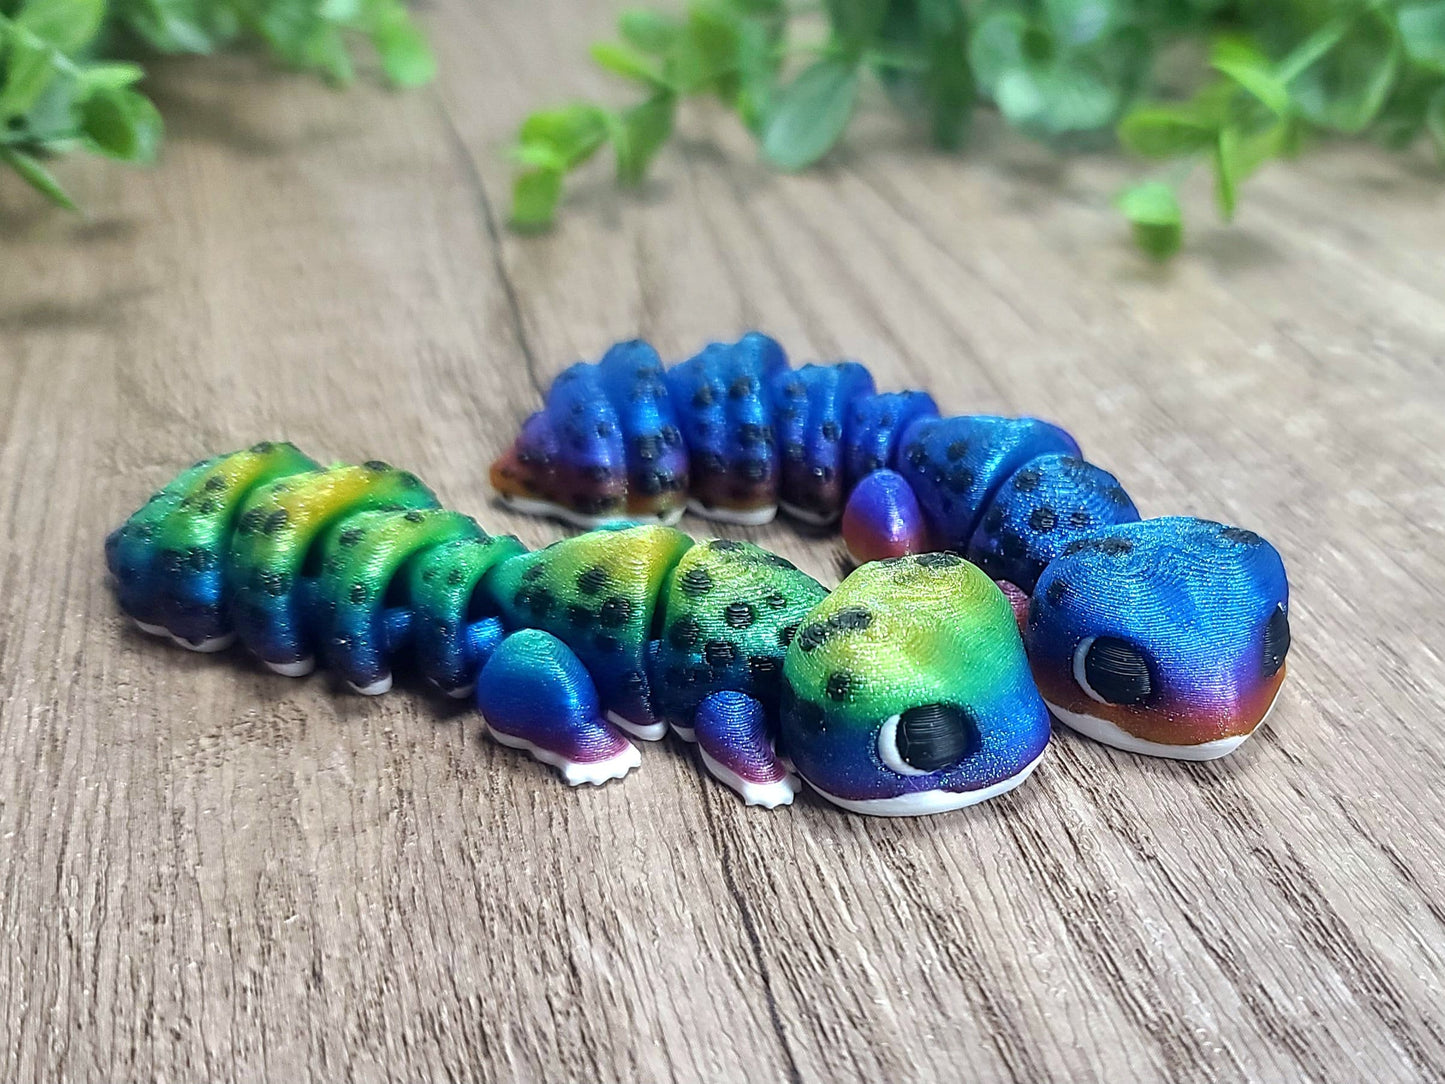 Rainbow Leopard Gecko, Baby Gecko, Gift for Her